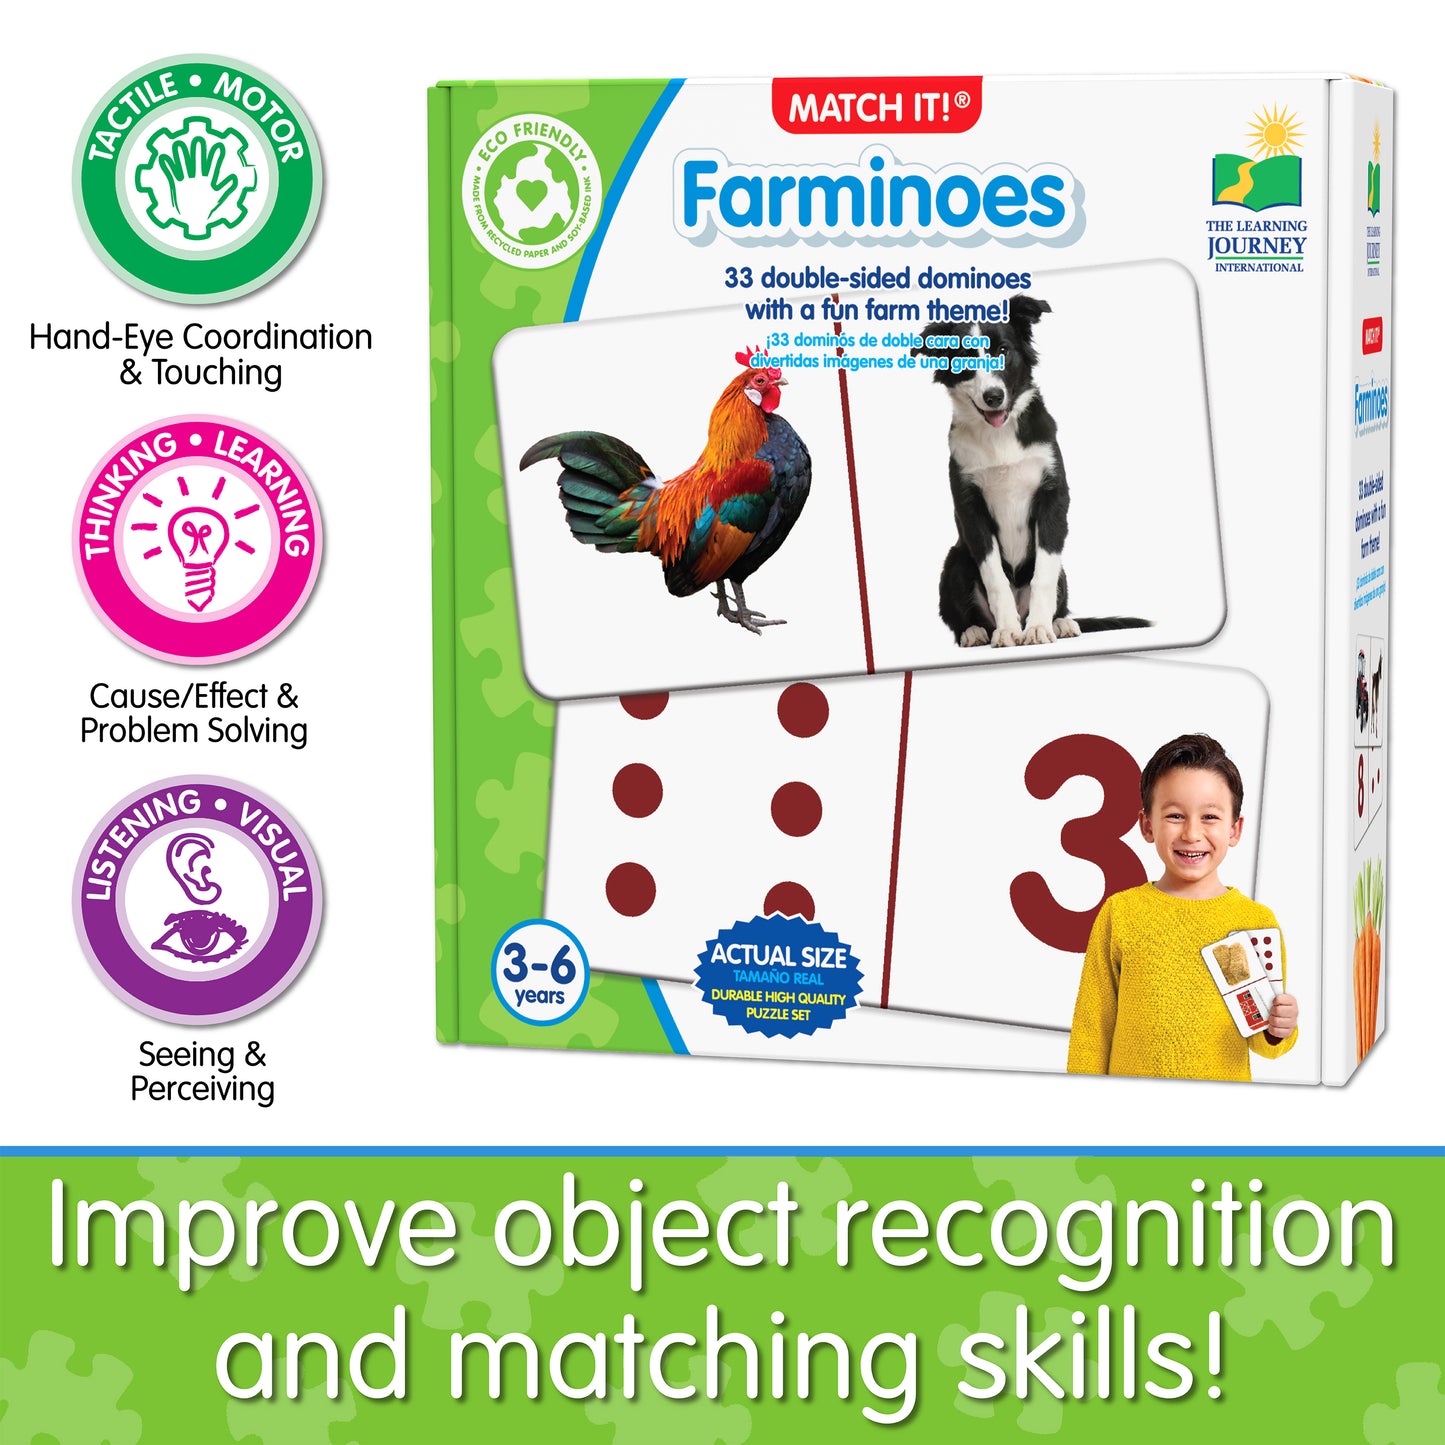 Infographic about Match It - Farminoes' educational benefits that says, "Improve object recognition and matching skills!"